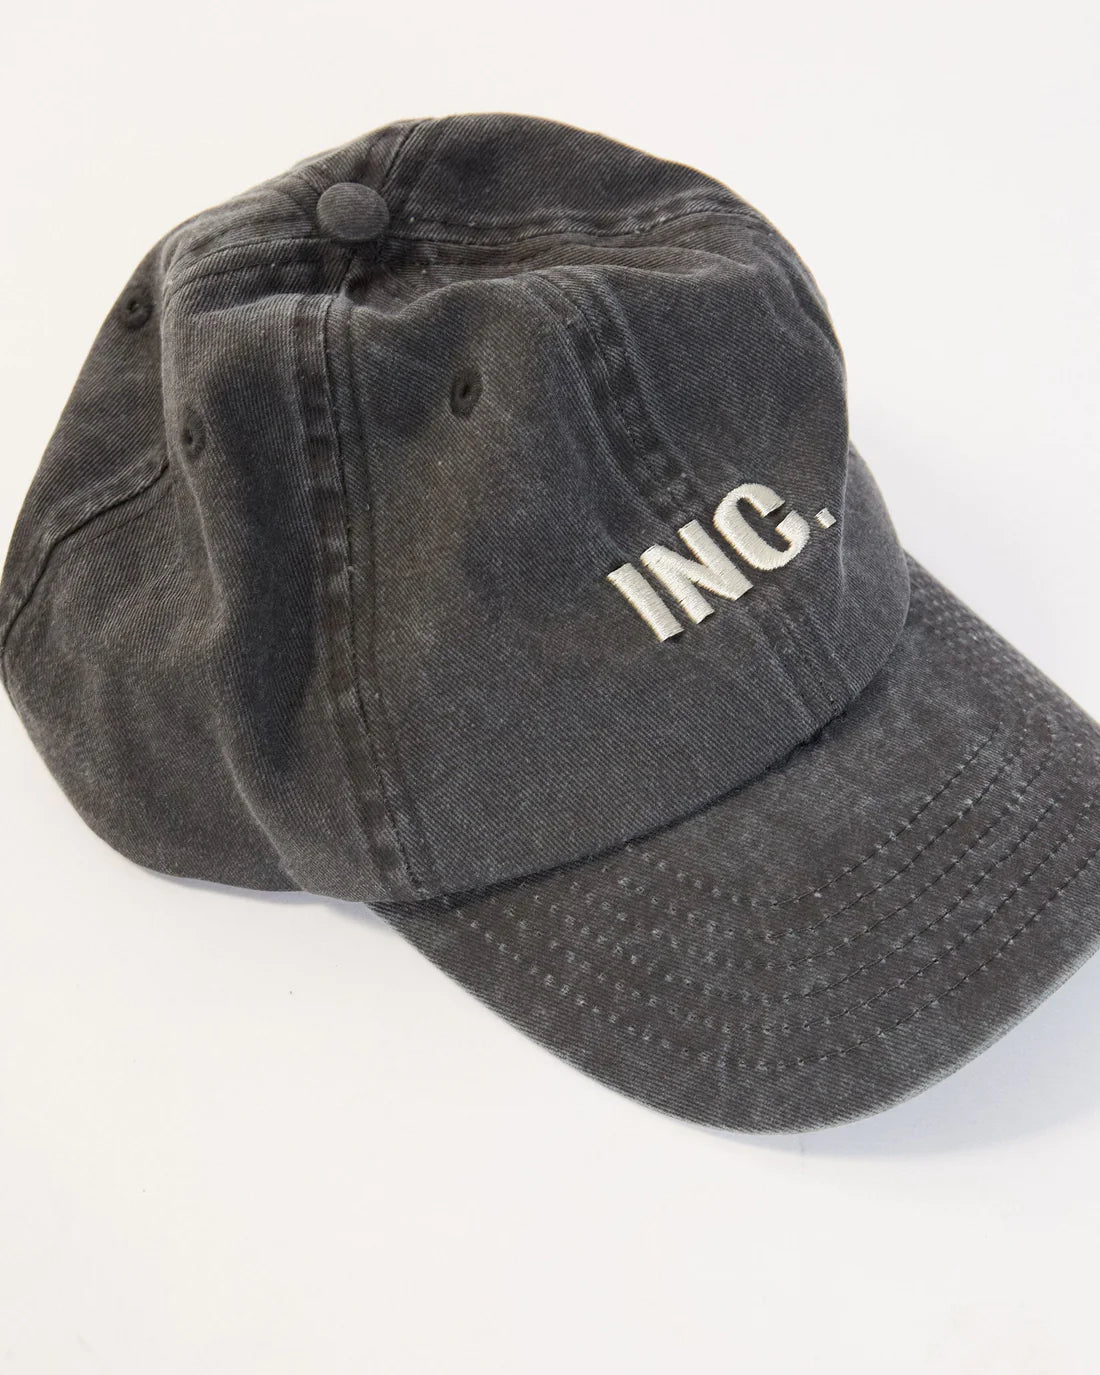 The Dad Cap - Washed Black